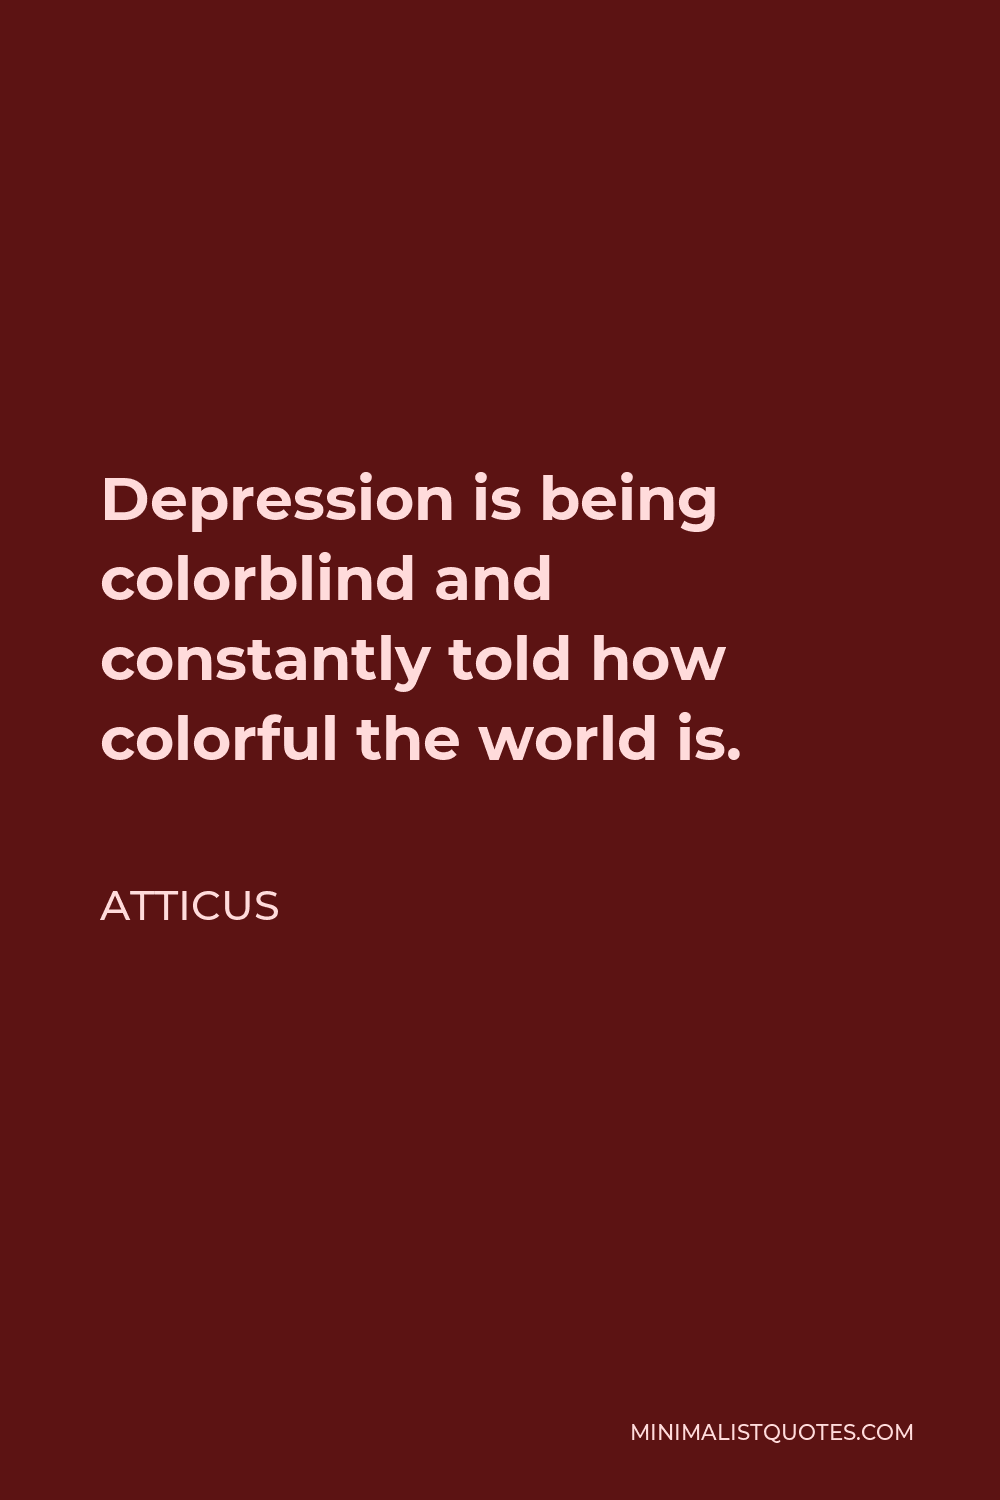 Atticus Quote: Depression is being colorblind and constantly told how ...